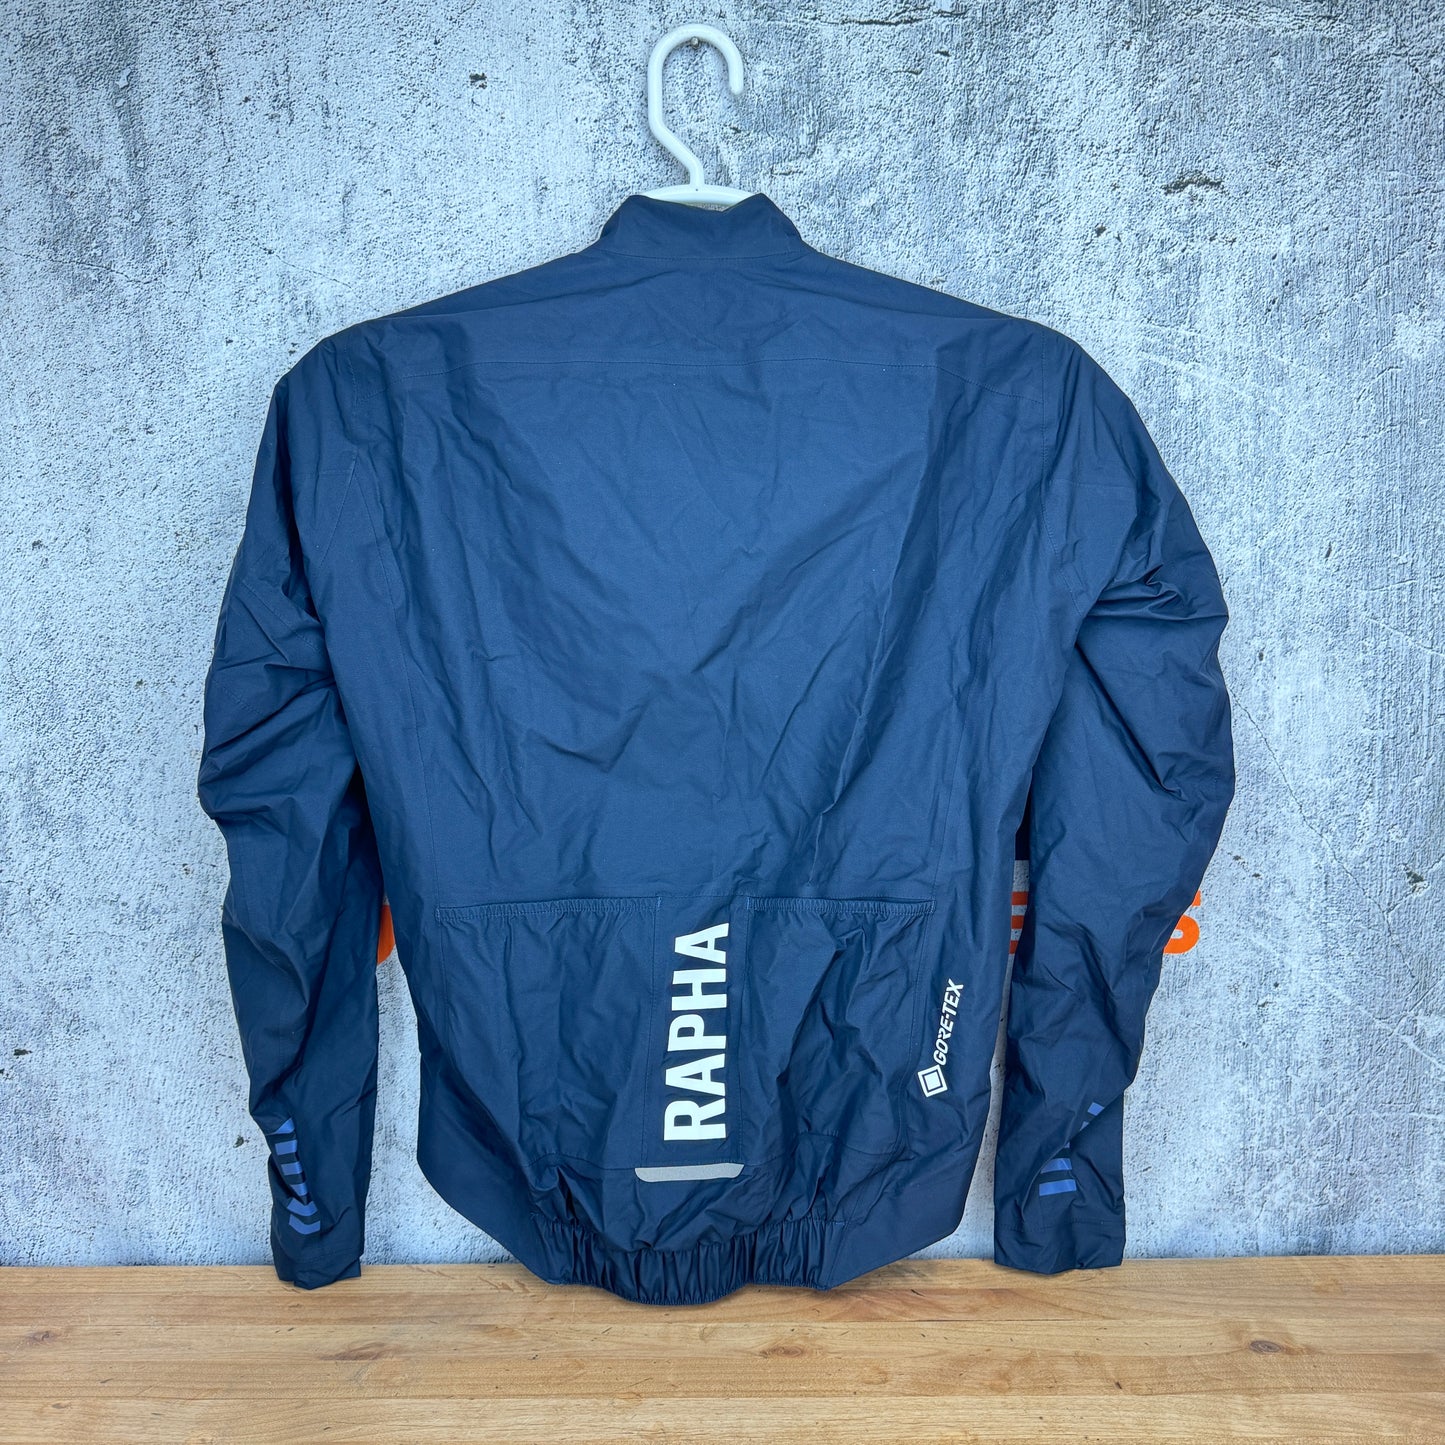 New! Rapha Men's Pro Team Insulated Gore-Tex Small Rain Jacket MSRP $420